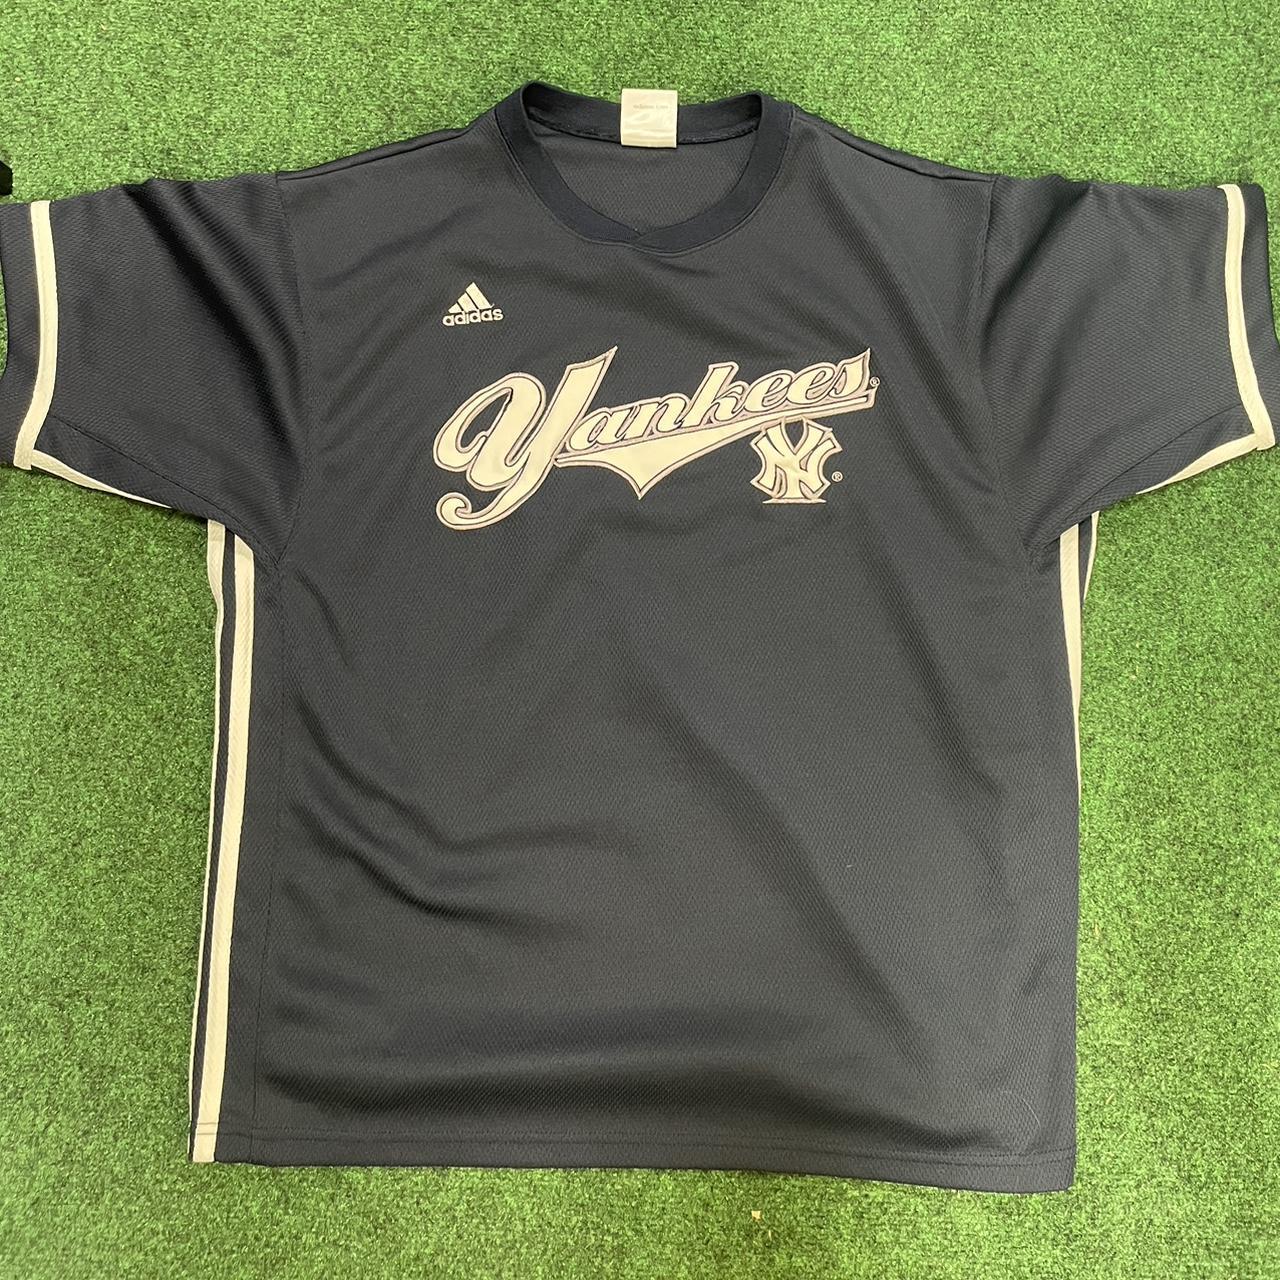 NEW YORK YANKEES JERSEY WANG 40 Rare find Has two - Depop